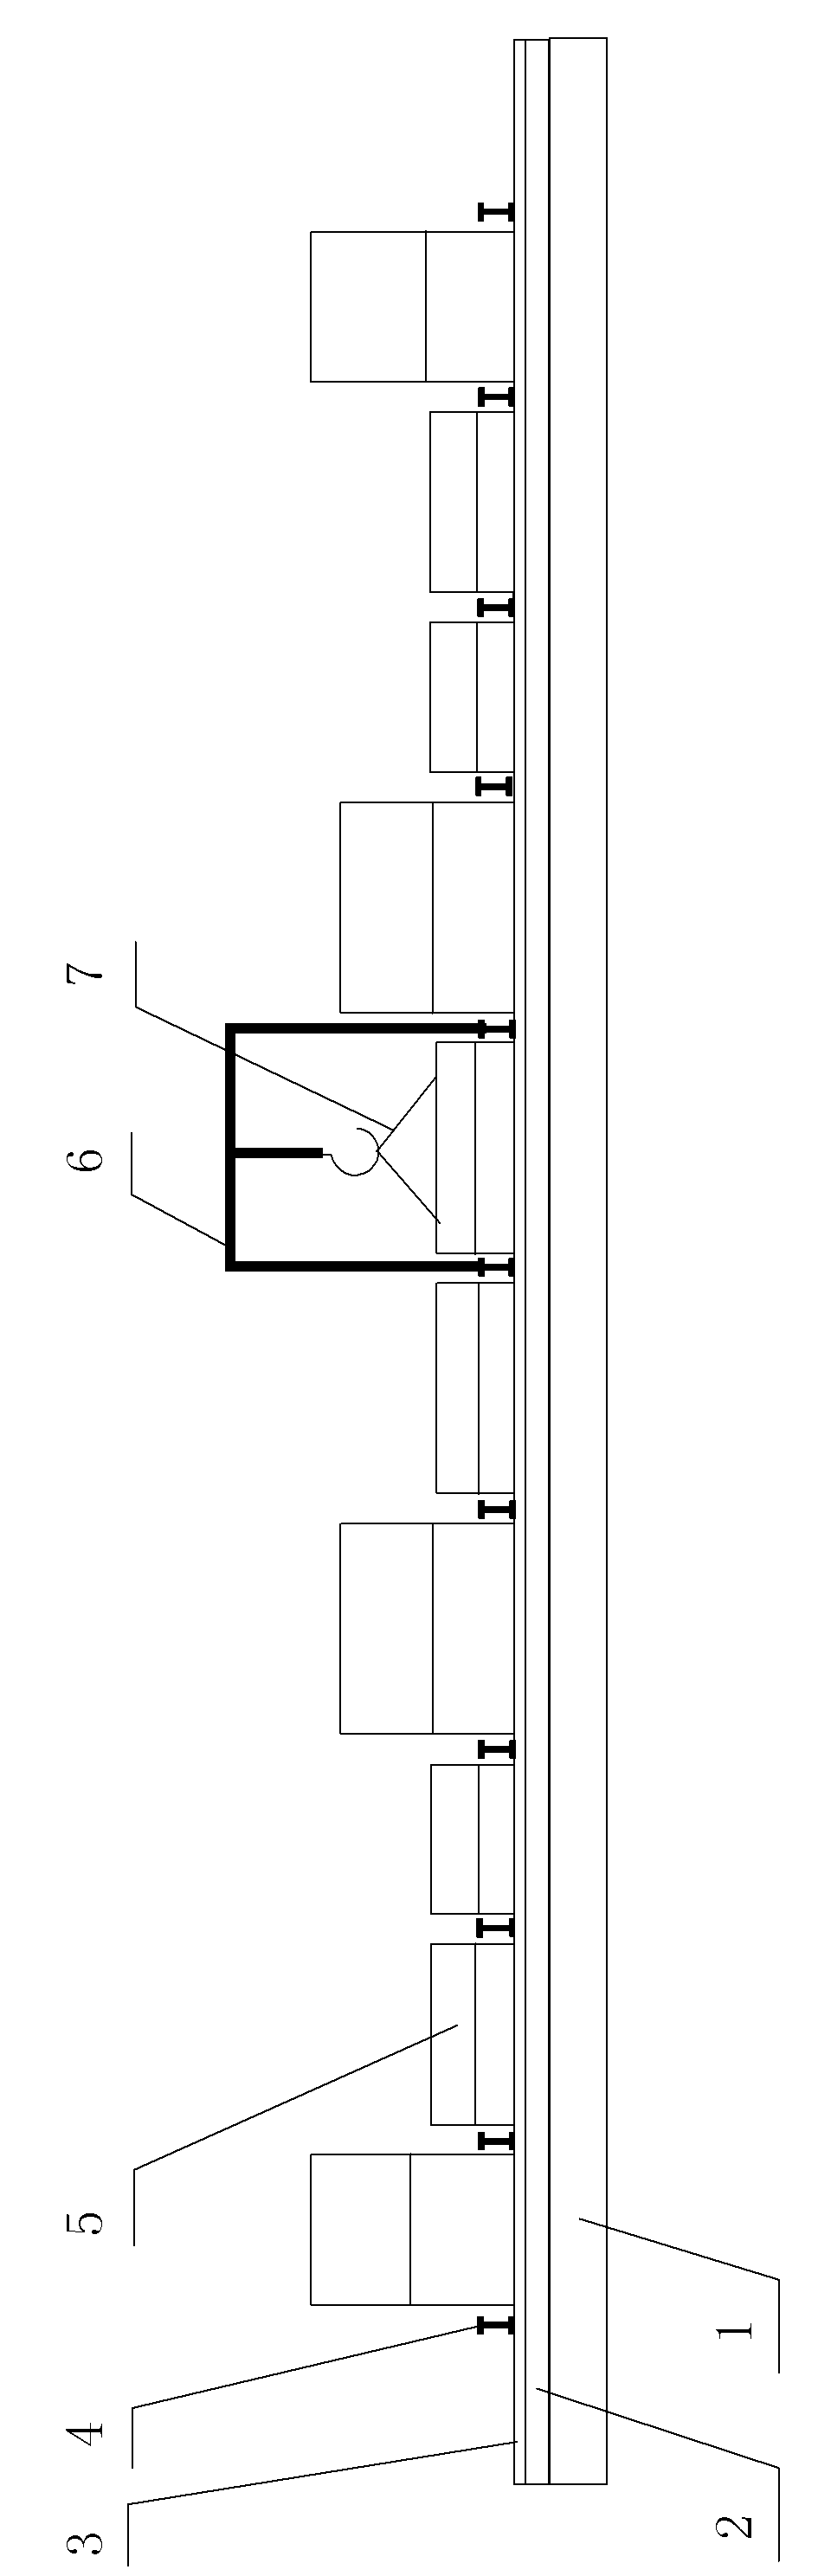 Method for carrying out load test on bridge support frame by prefabricated parts moved through tractive walking